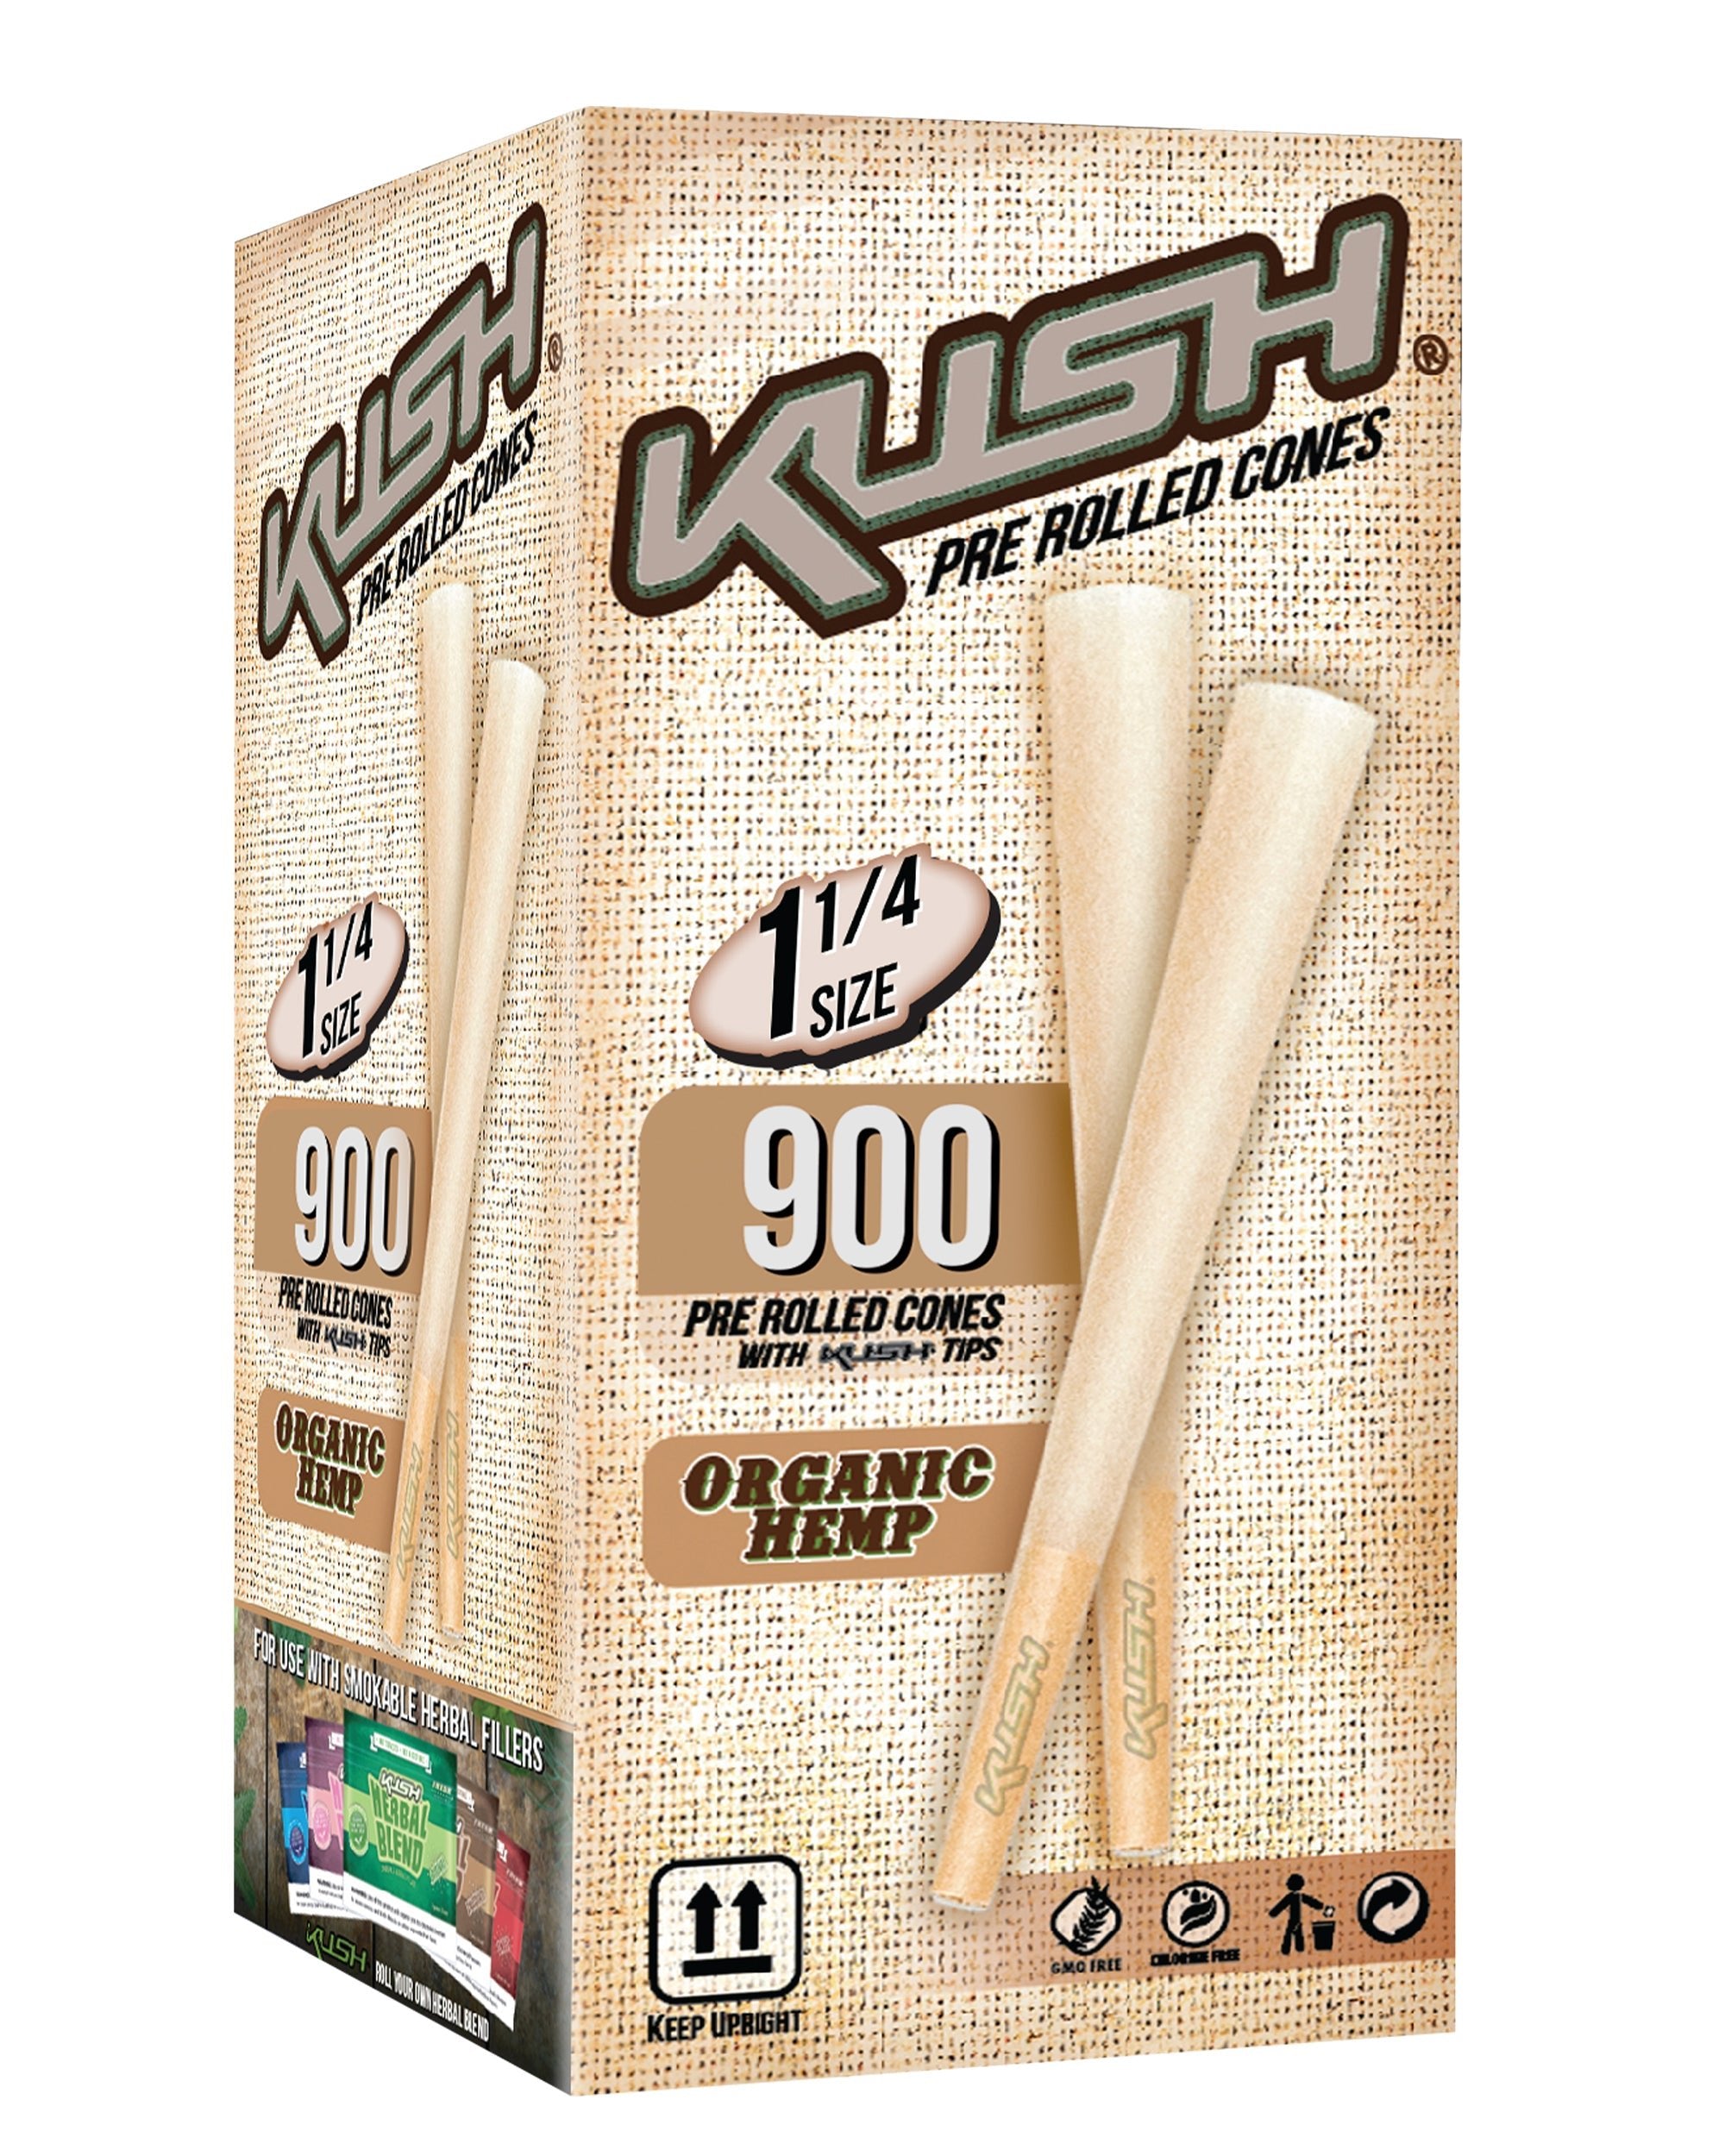 KUSH | Organic 1 1/4 Paper Pre-Rolled Cones w/ Filter Tip | 84mm - Hemp - 900 Count - 1